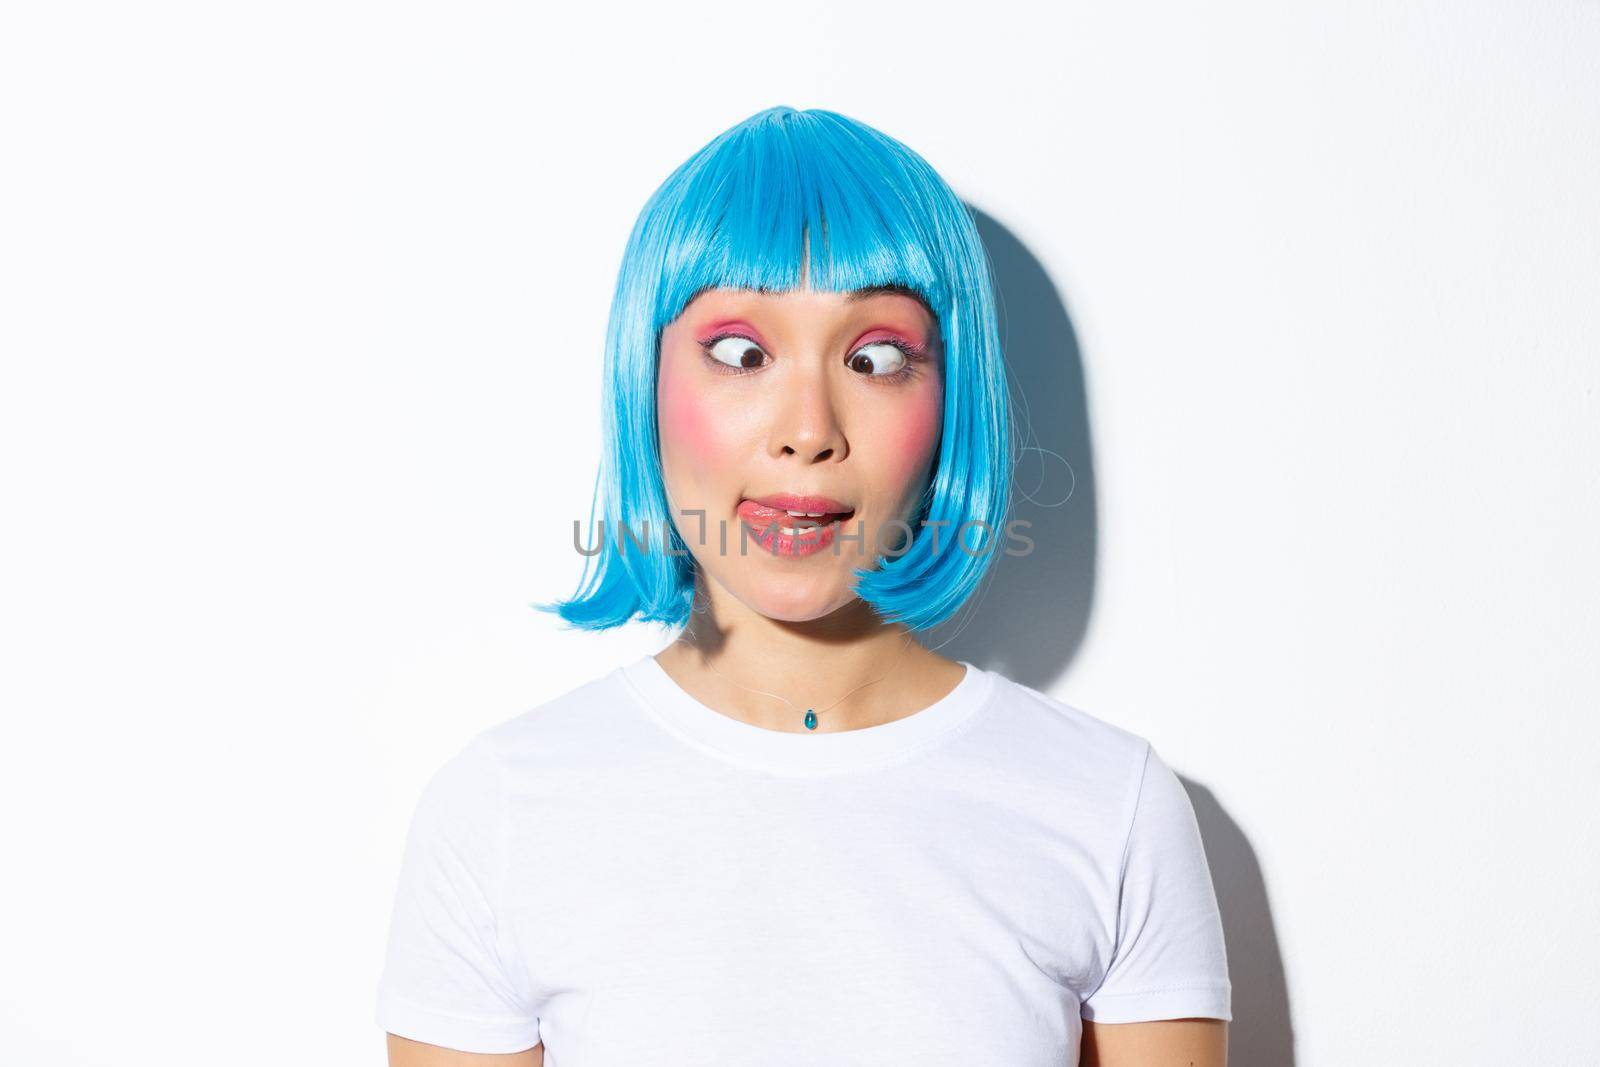 Close-up of funny and silly asian girl entertainer celebrating halloween, wearing blue wig and squinting, showing grimaces.